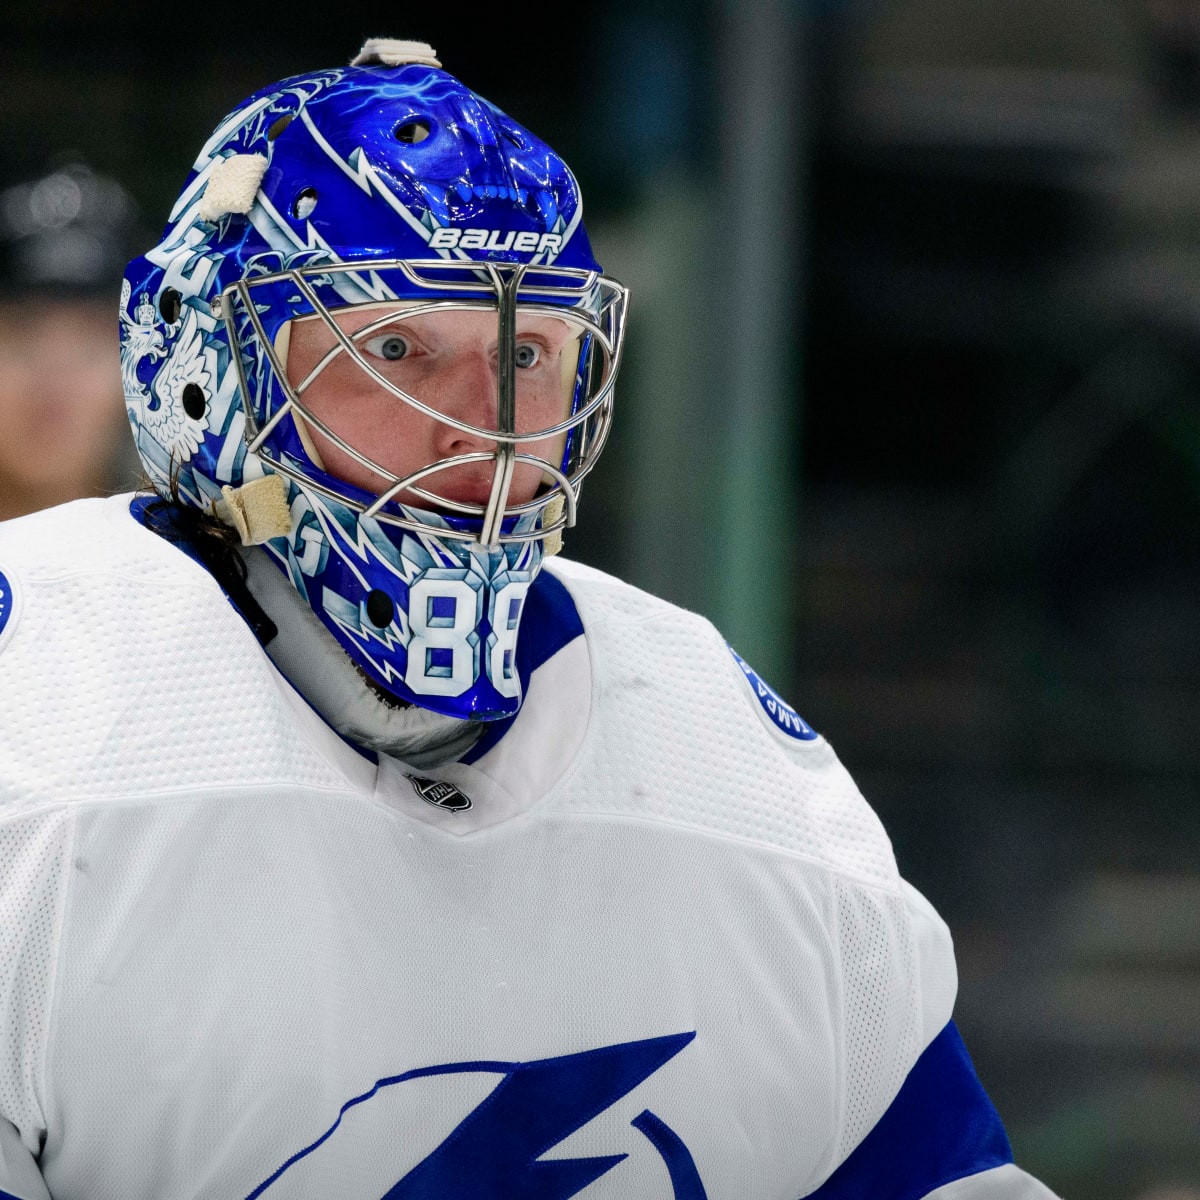 Vasilevskiy remains the choice among NHL skaters for the title of best  goalie in the world